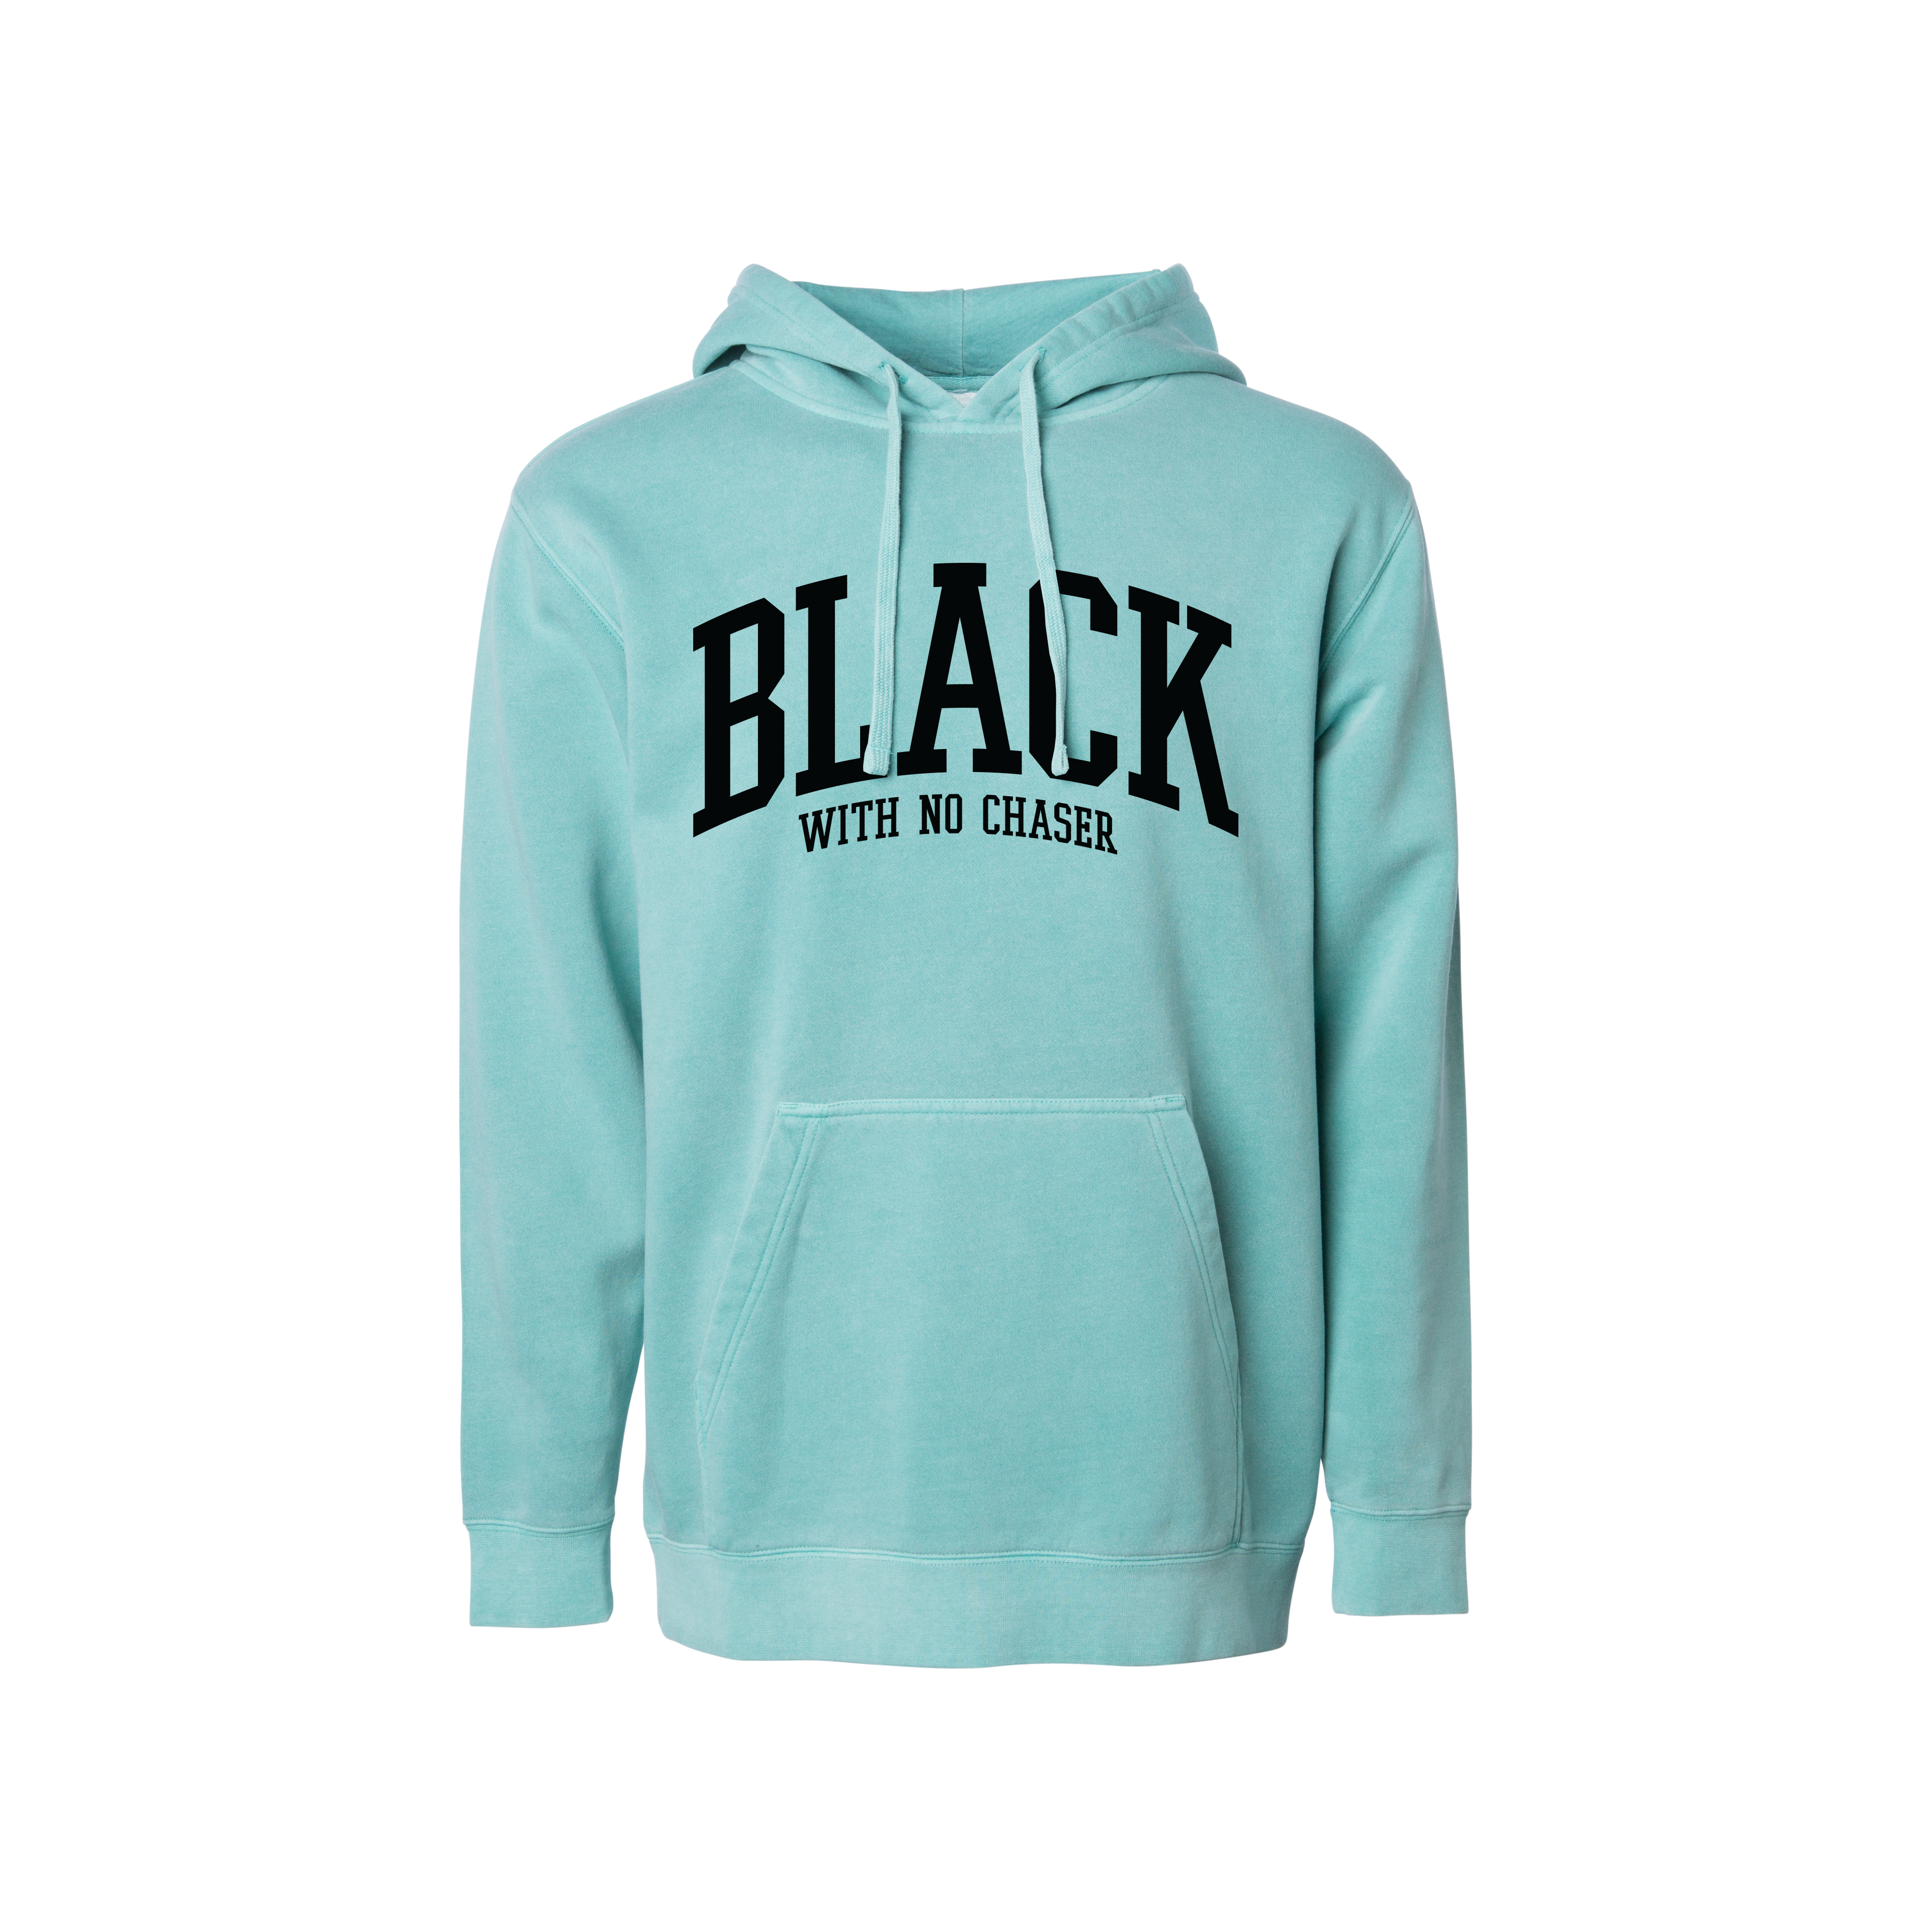 "Black With No Chaser" Collegiate Hoodie "Mint"